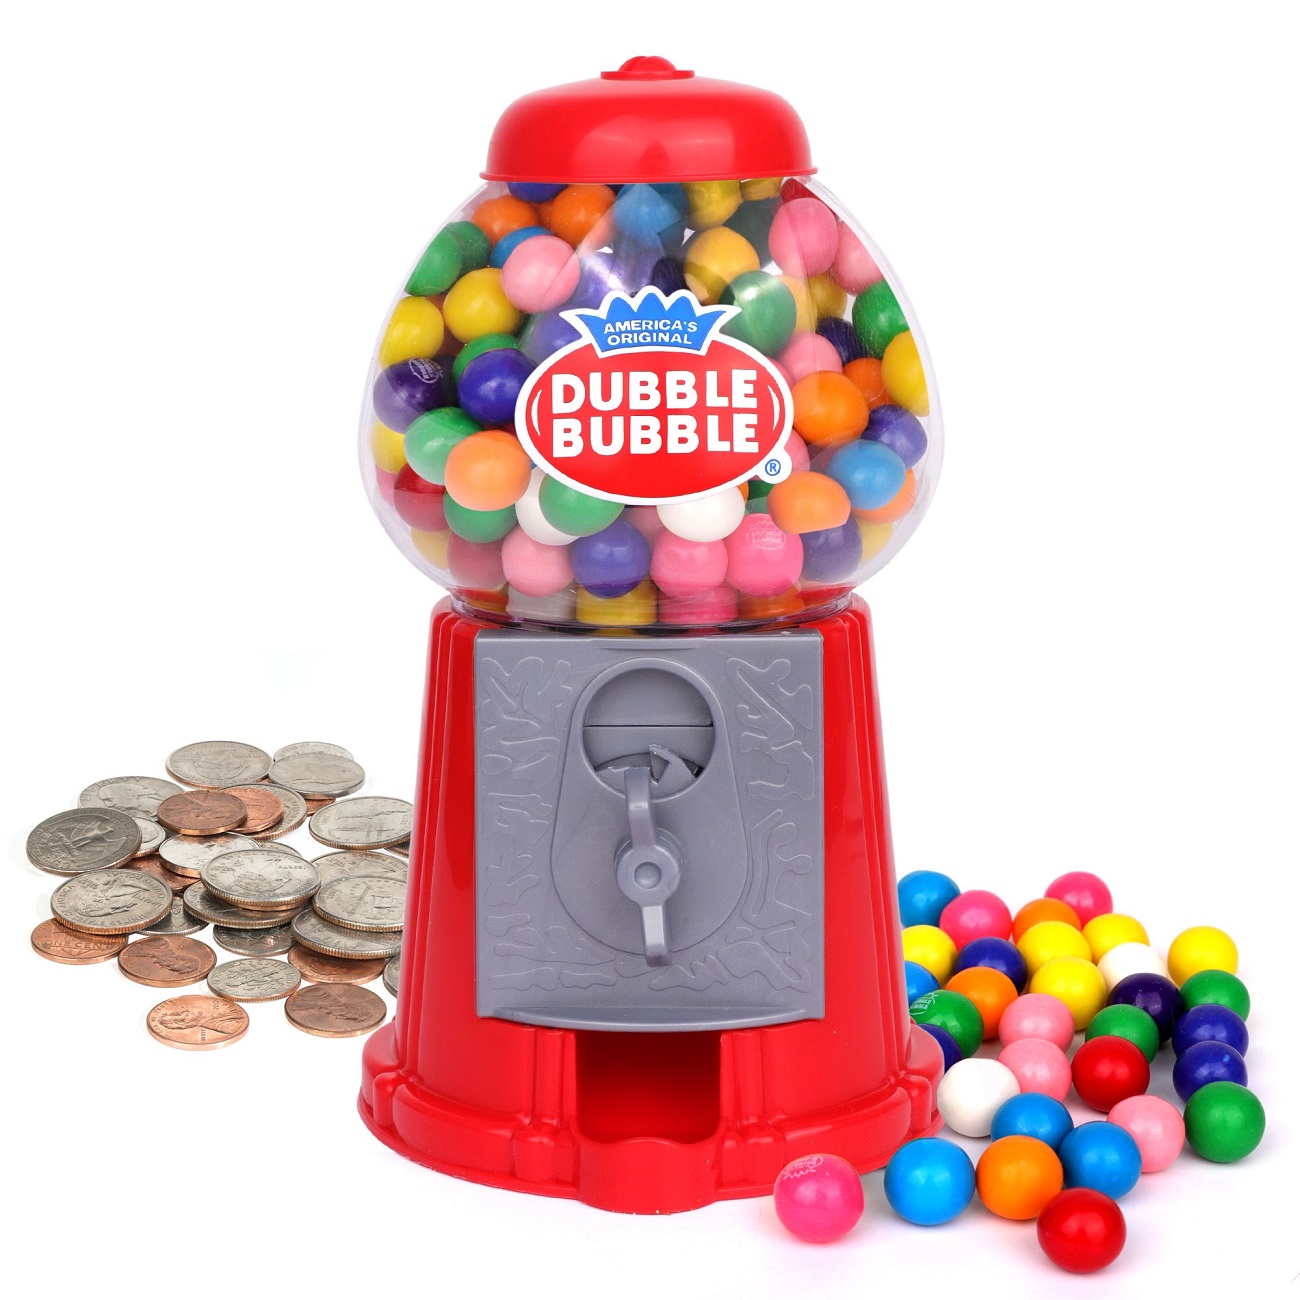 Joyabit Coin Operated Gumball Machine Toy Bank Dubble Bubble Classic Style Multi-color Solid Print Party Favors, with 45 Gum Balls 45 Count - image 1 of 9